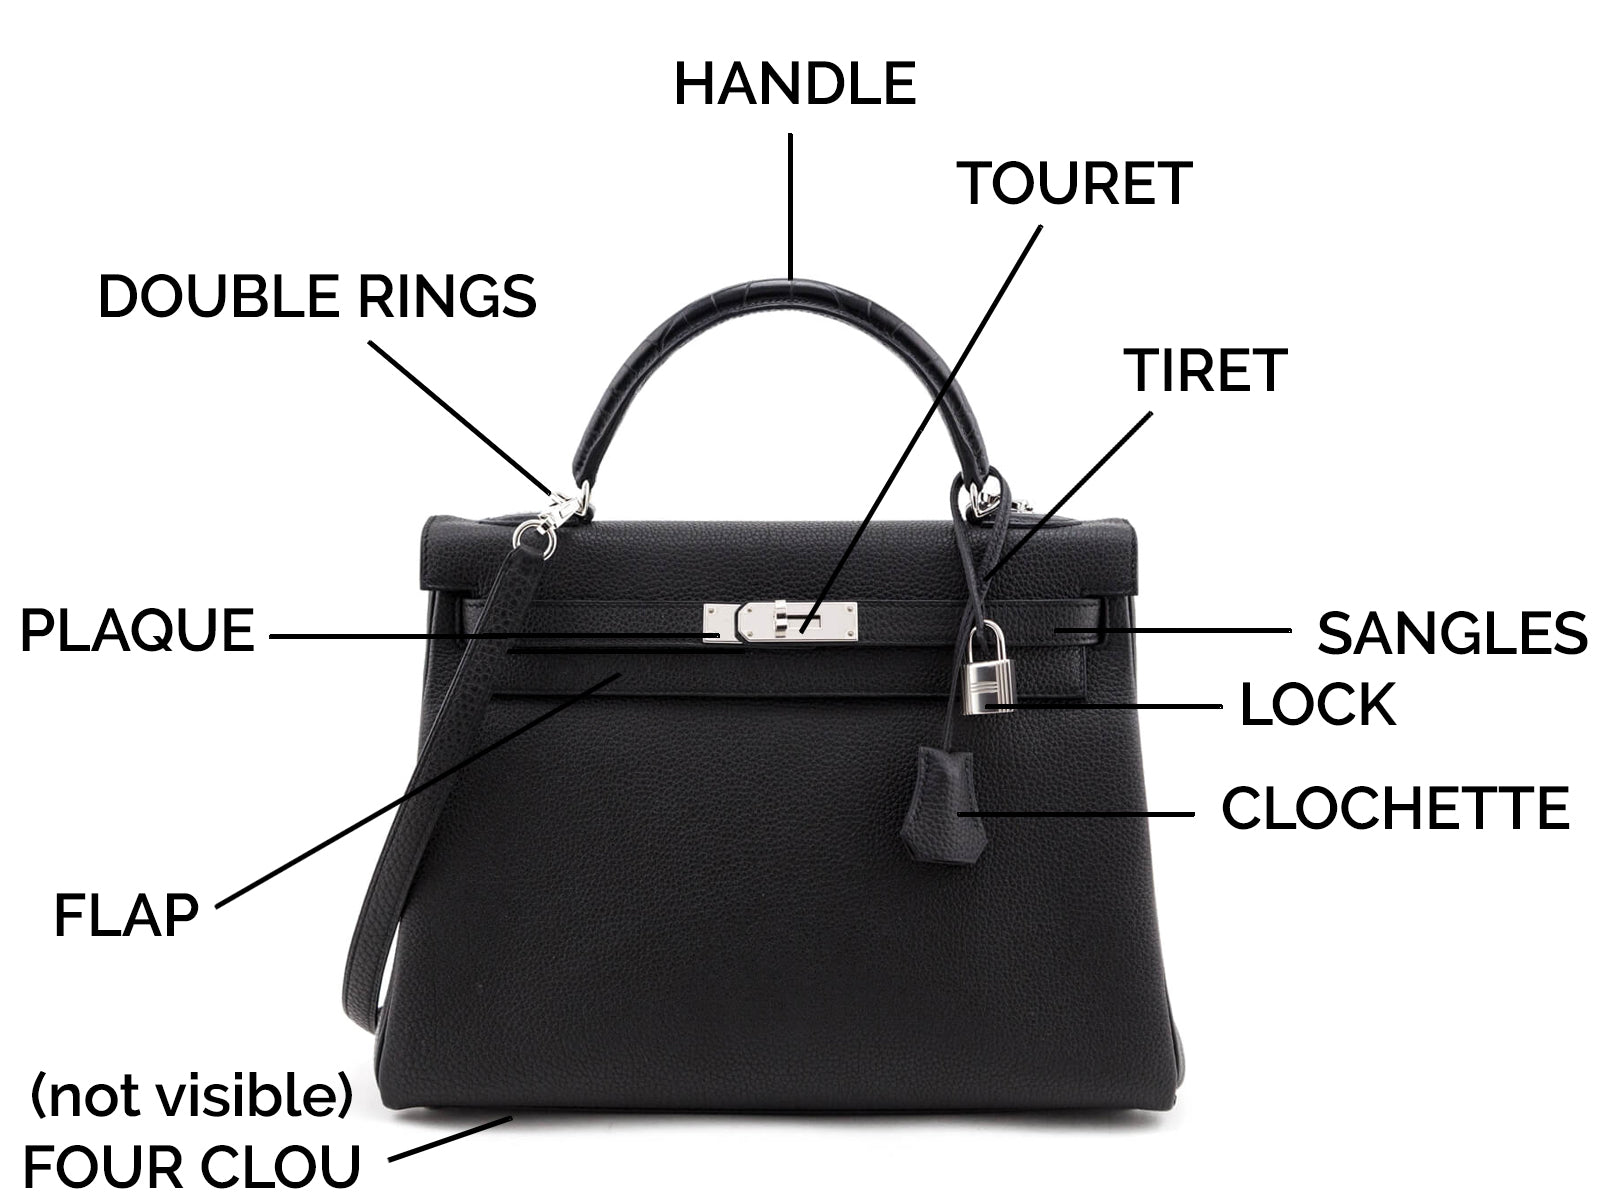 Discover everything there is to know about the Hermes Kelly Bag